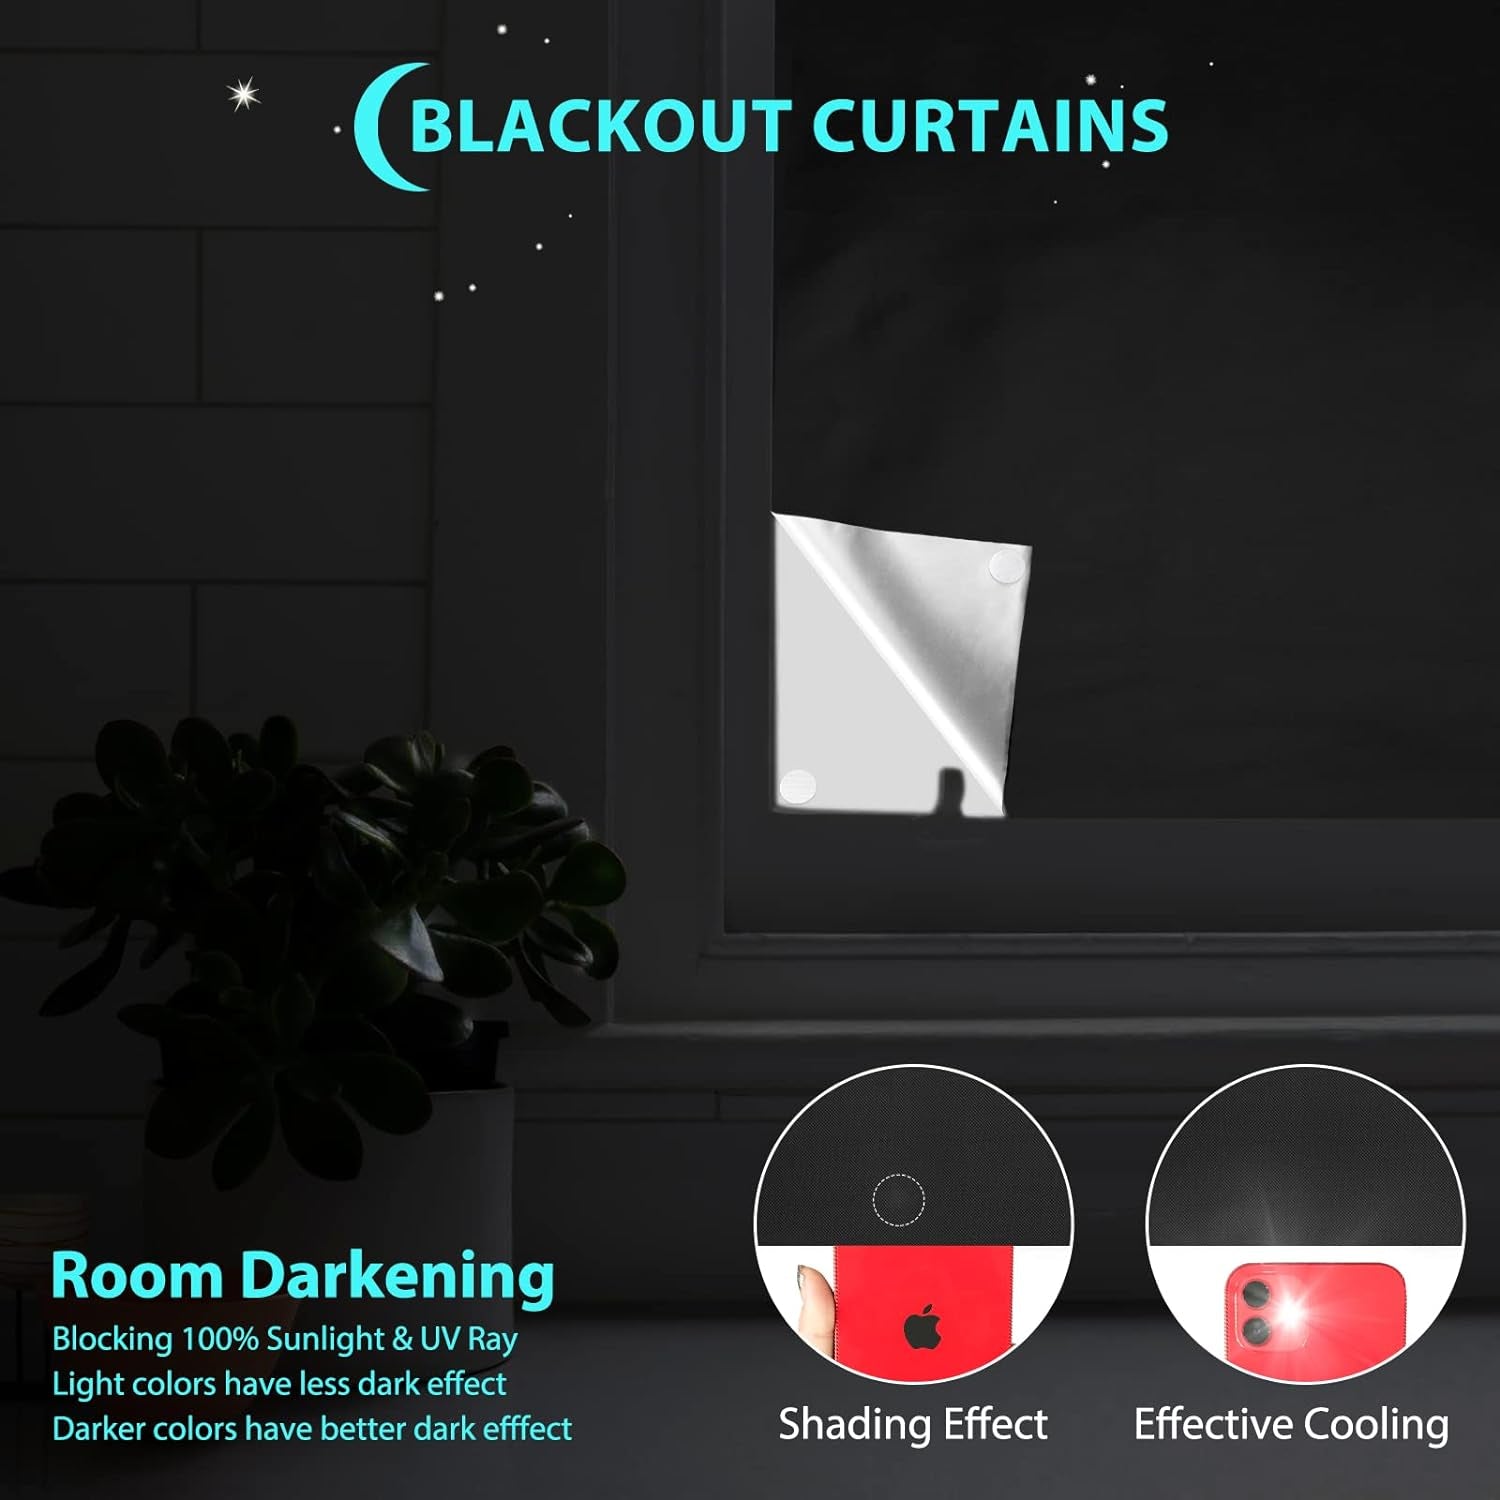 Blackout Curtains, Portable Window Curtain Shade 100% Black Out Room Darkening Light Blocking Drapes for Bedroom Living Room - 118" X 57", Black & Silver  BCJJ   